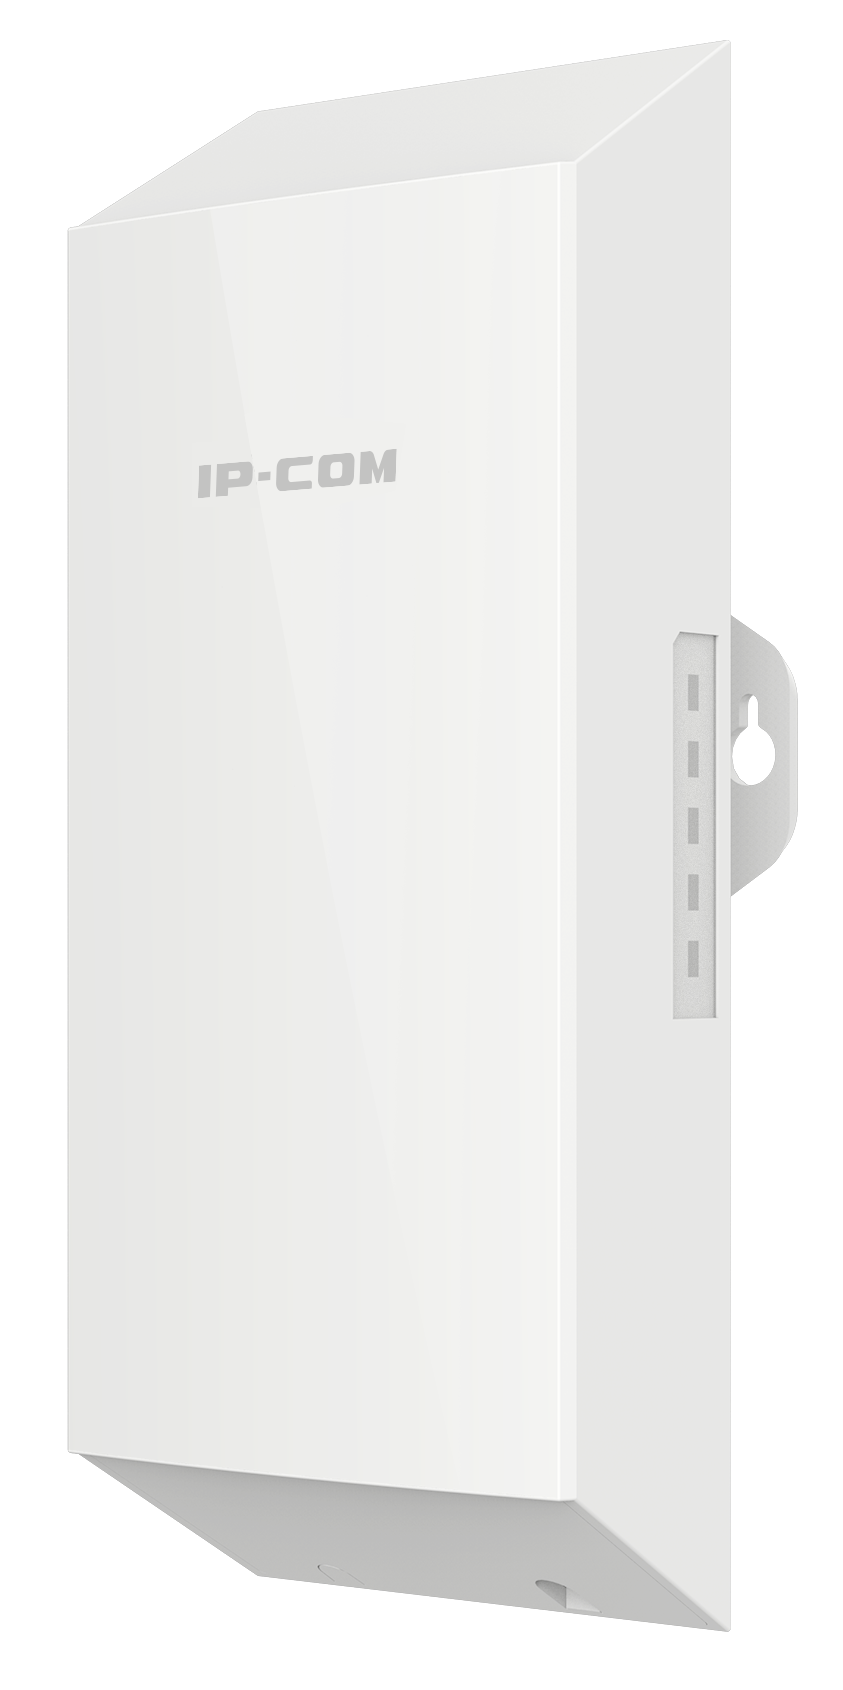 IP-COM 2.4GHz OUTDOOR CPE 8dBi POINT TO POINT AUTO-PAIRING 1 x ETHERNET IP65 300Mbps UPTO 500M POLE MOUNTED WHITE 12V PASSIVE POE/ 9-12VDC